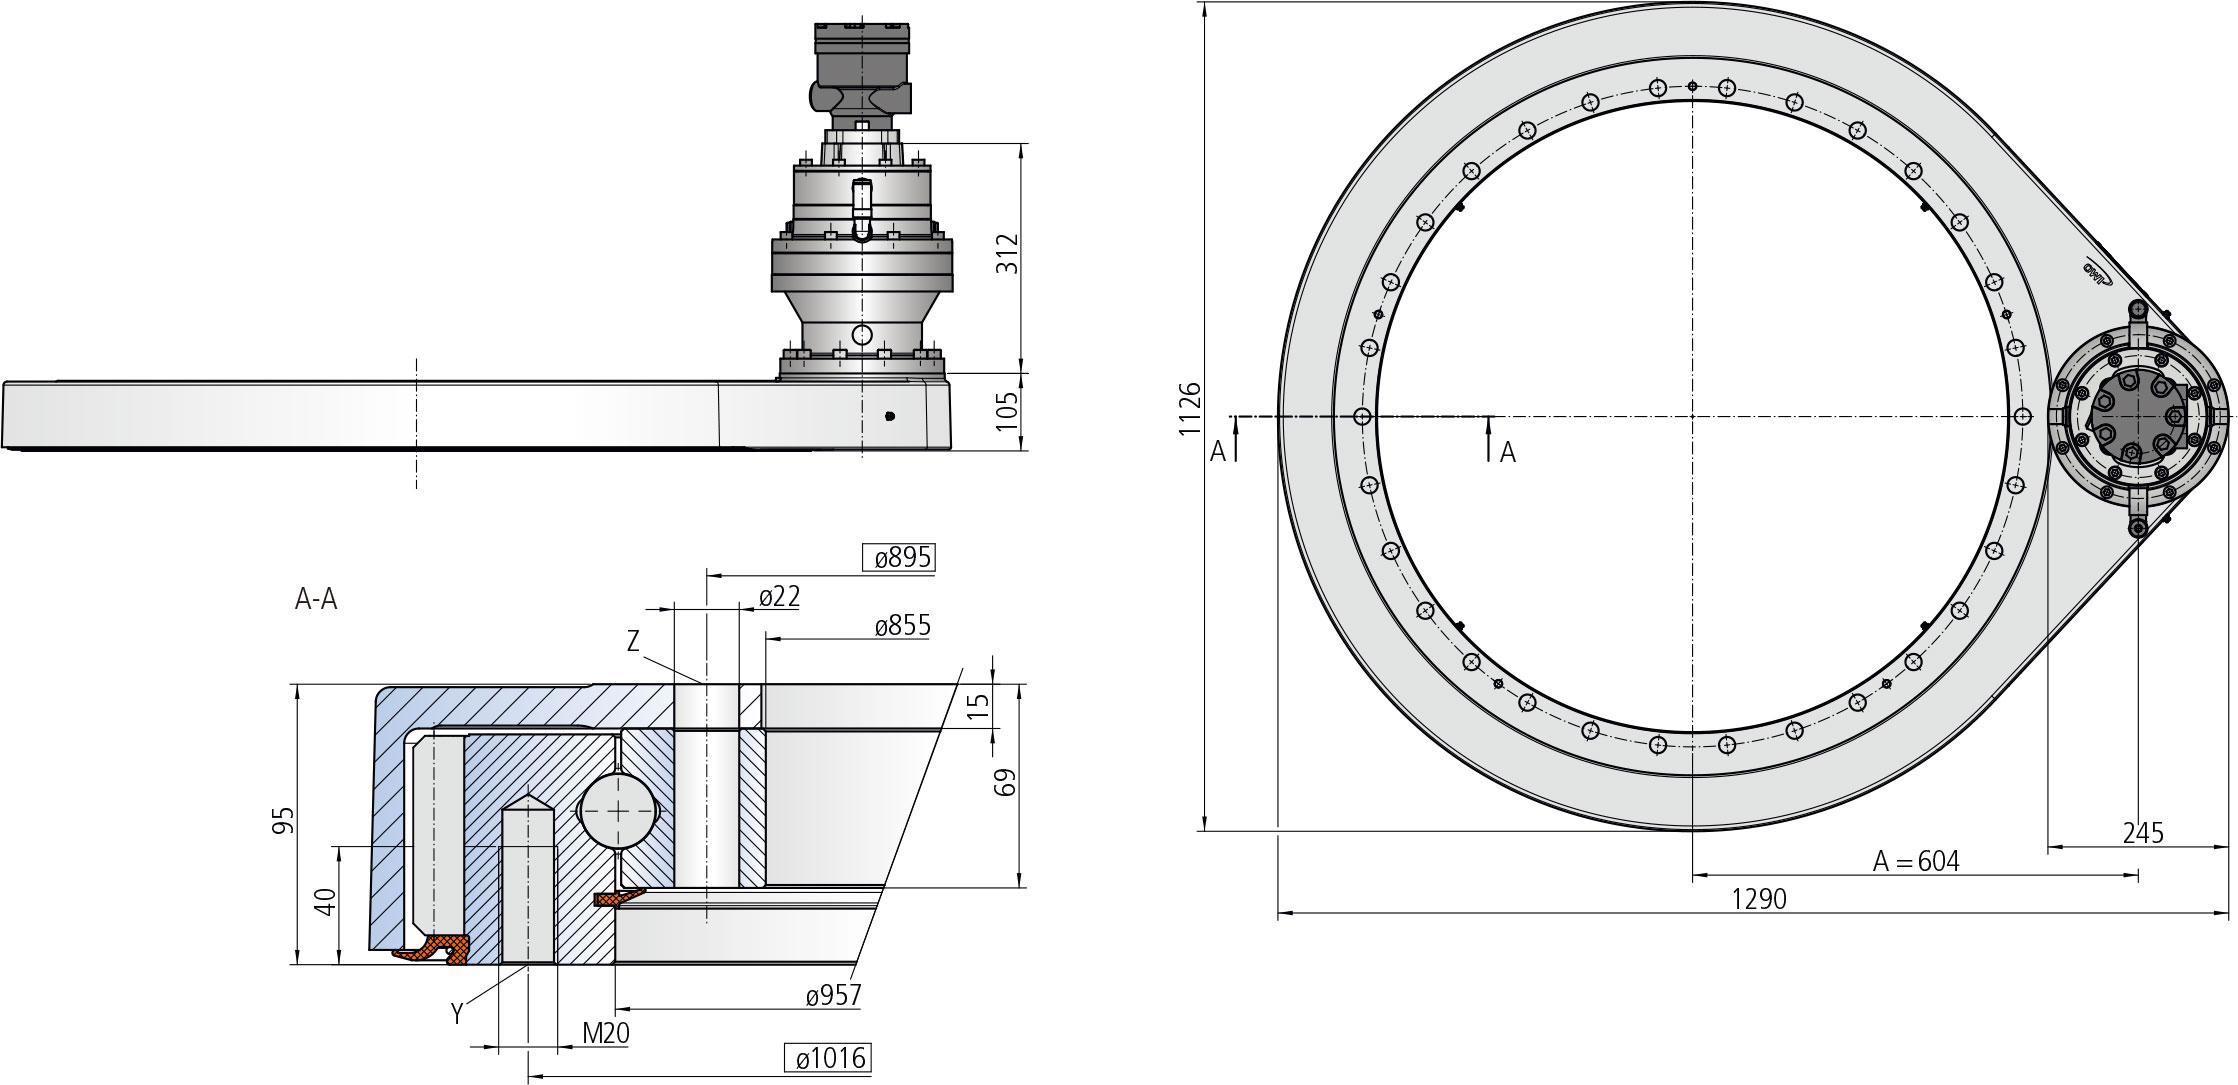 SP-H 0955 SP-H Series cad drawing